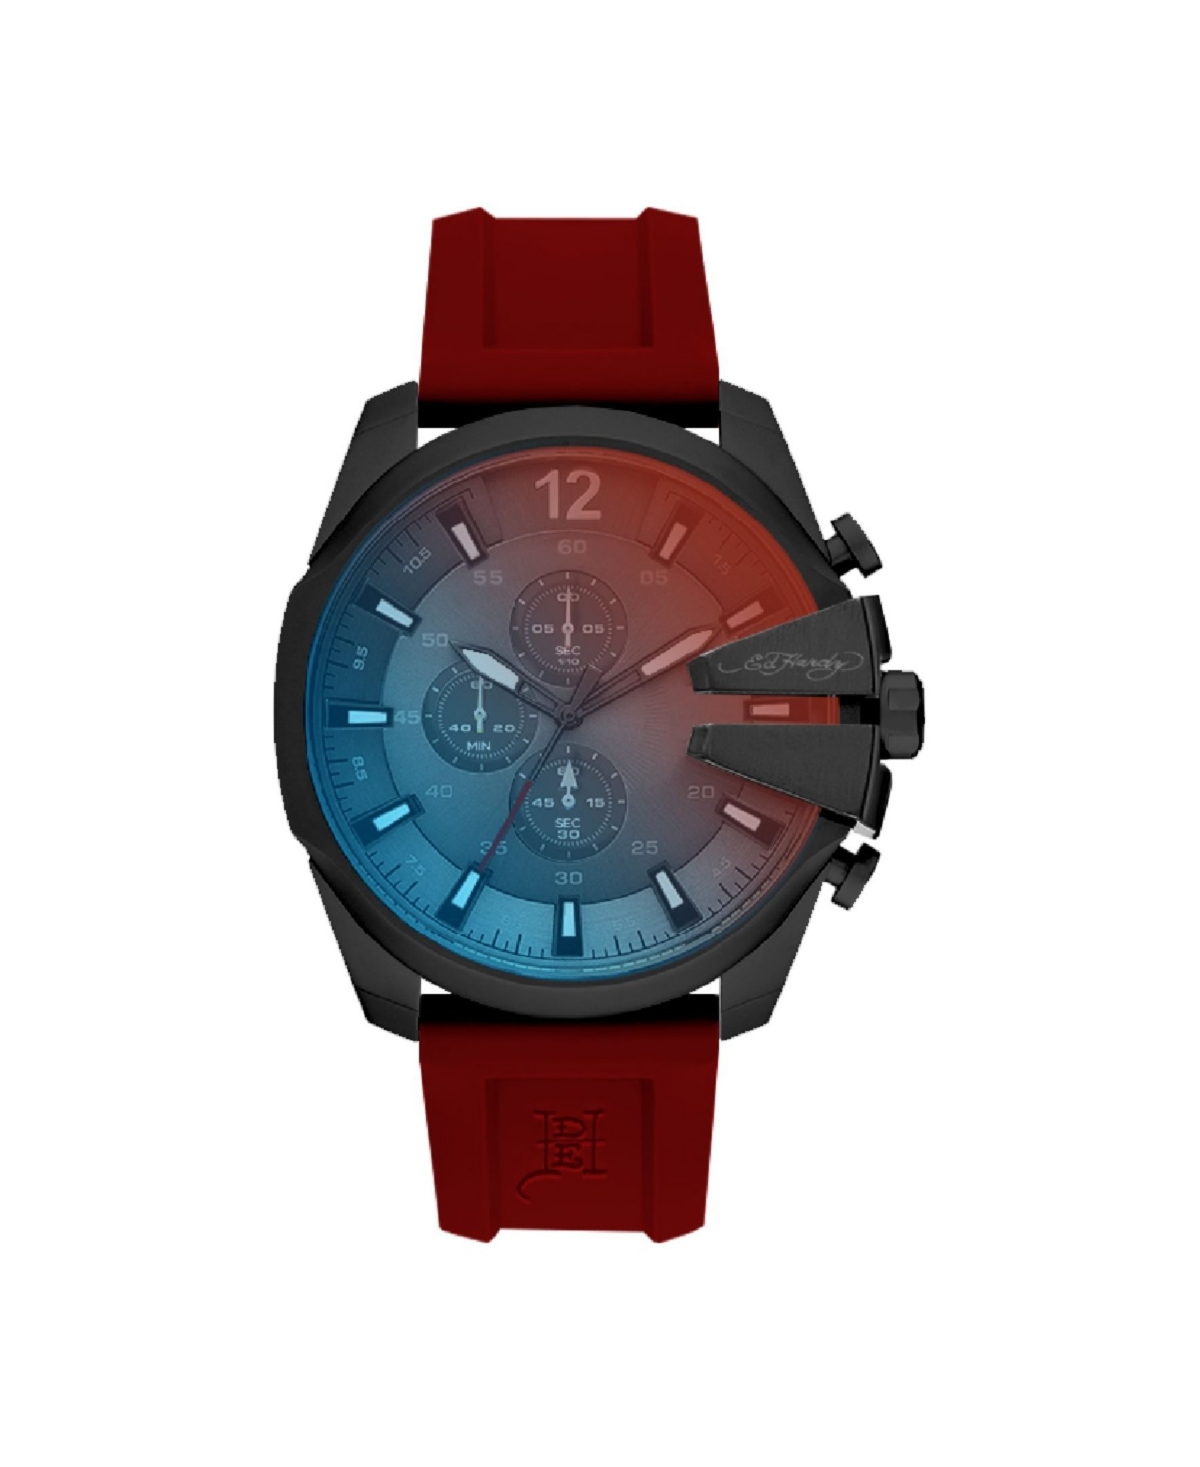 Men's Red Silicone Strap Watch 53mm - Brushed Gunmetal Sunray, Red